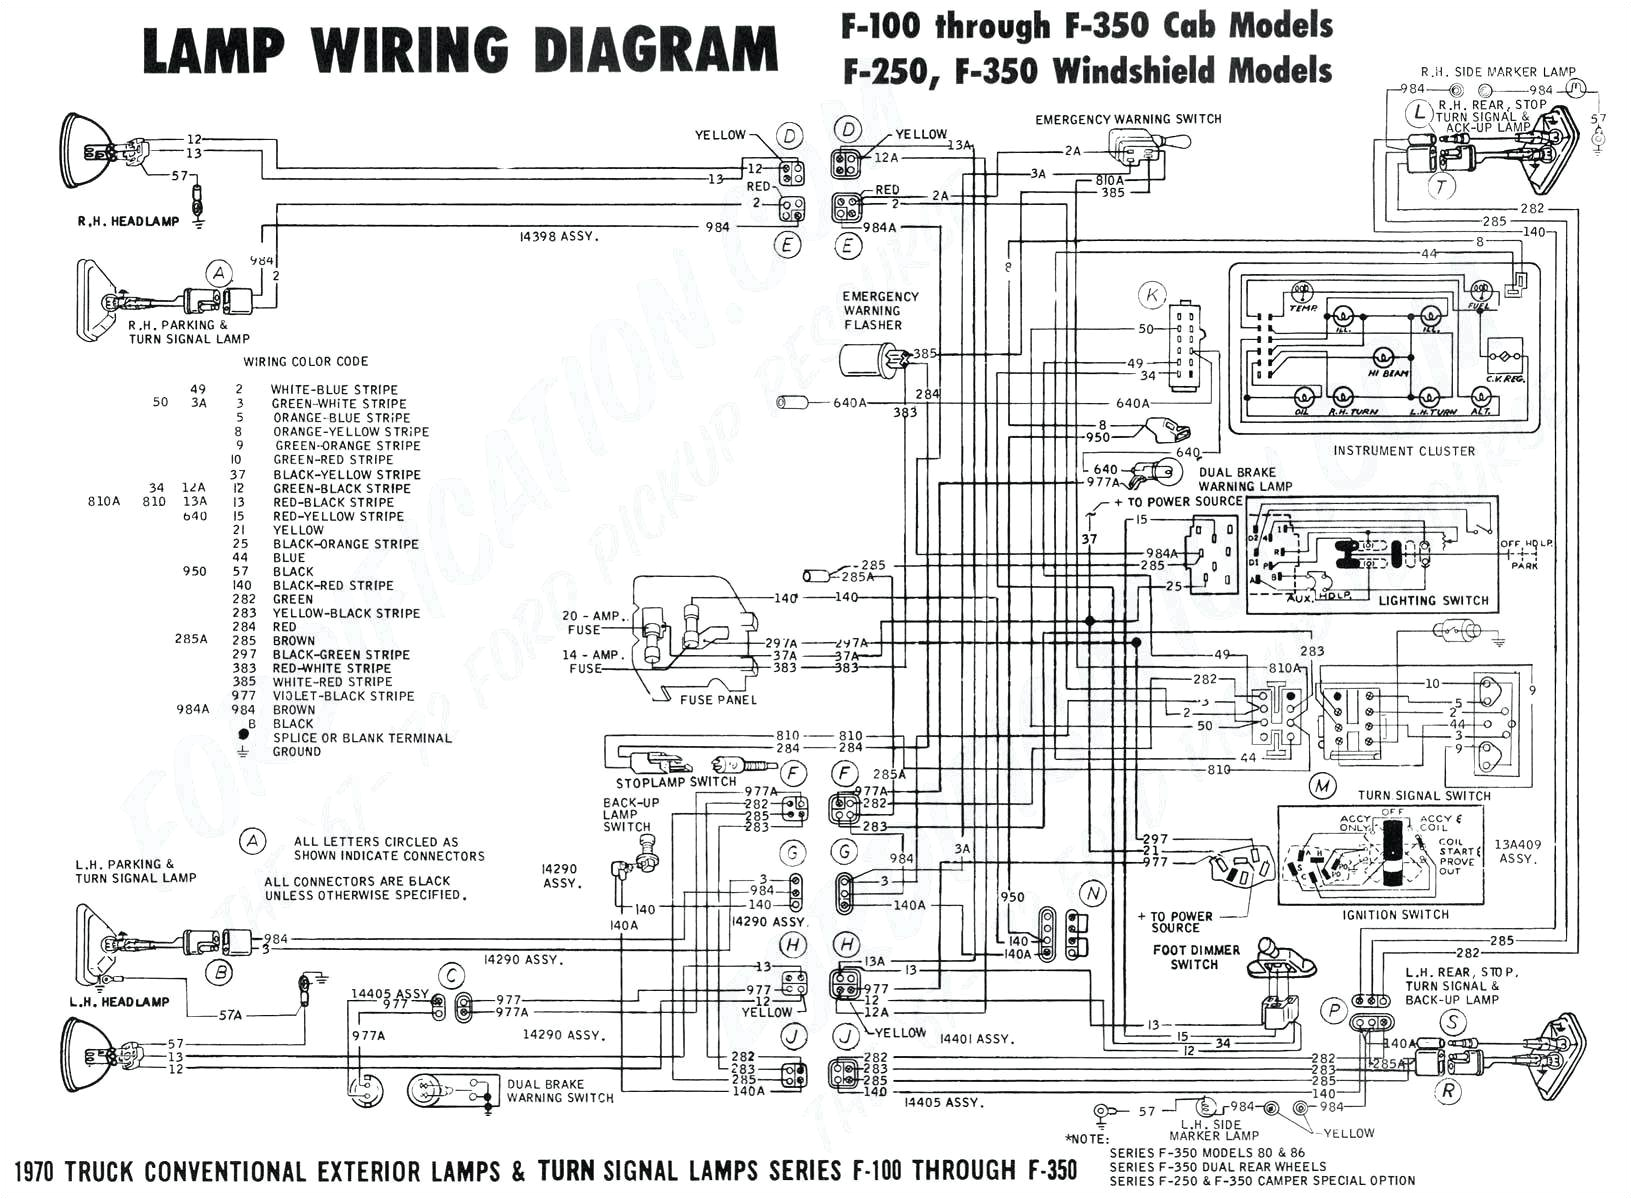 1998 ford explorer windshield wiper wiring diagram wiring diagram note 1997 ford f 150 vacuum diagram on 2000 ford expedition rear wiring